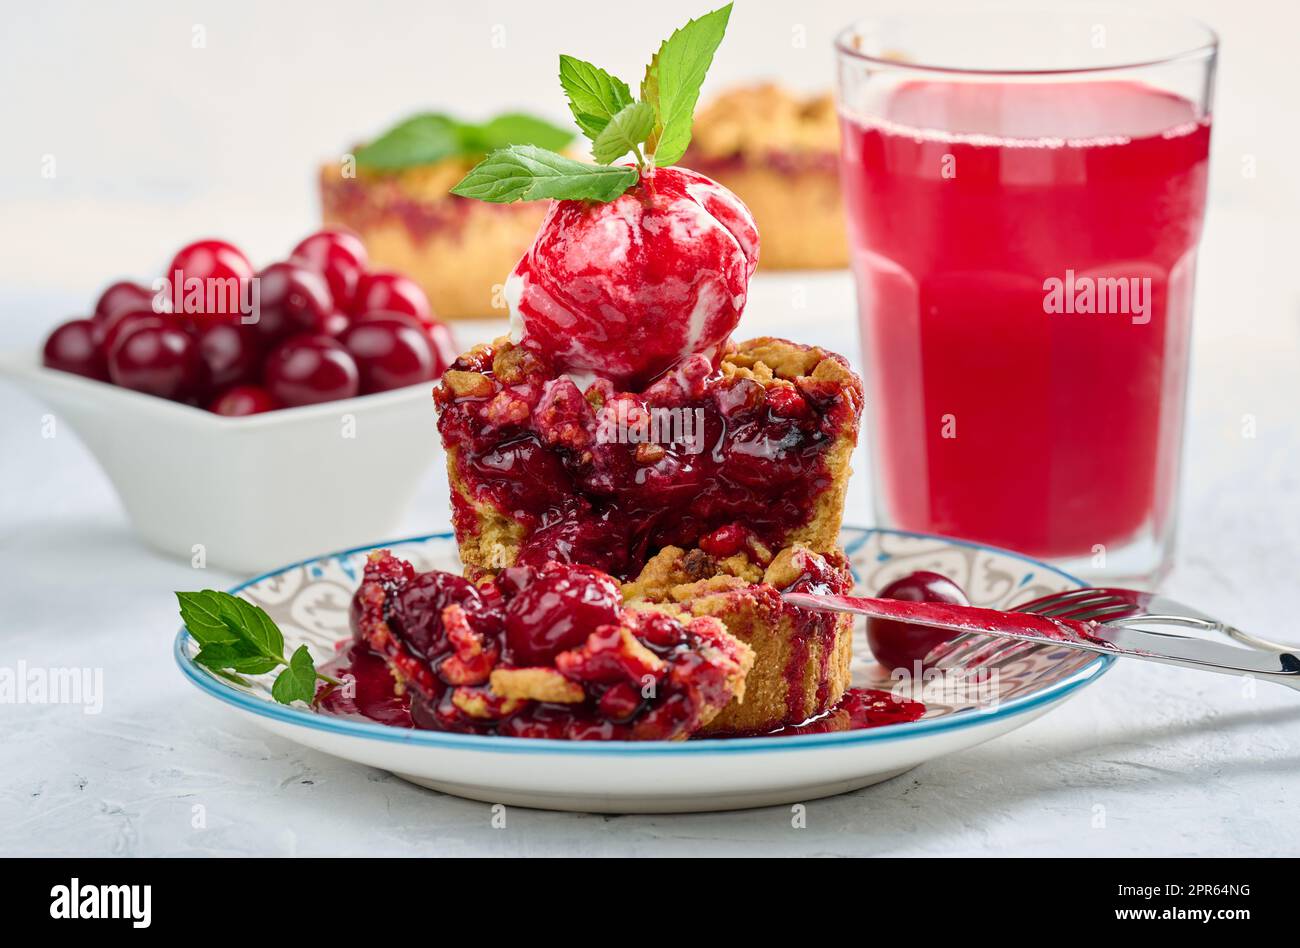 Cherry crumble pie decorated with a scoop of ice cream Stock Photo